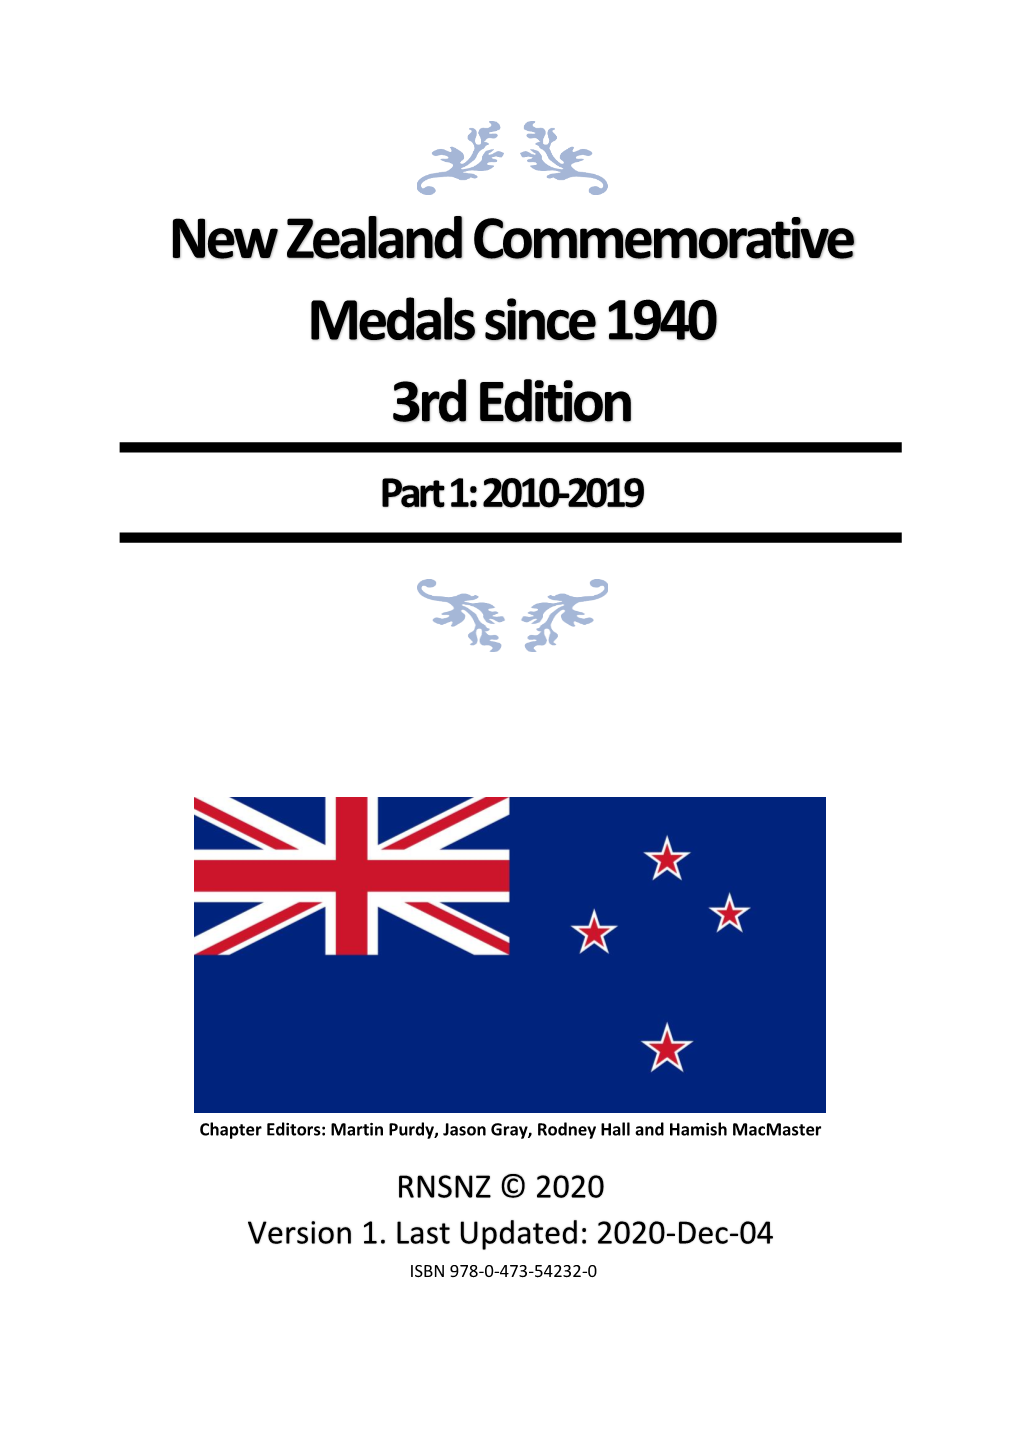 New Zealand Commemorative Medals Since 1940 3Rd Edition Part I: 2010-2019